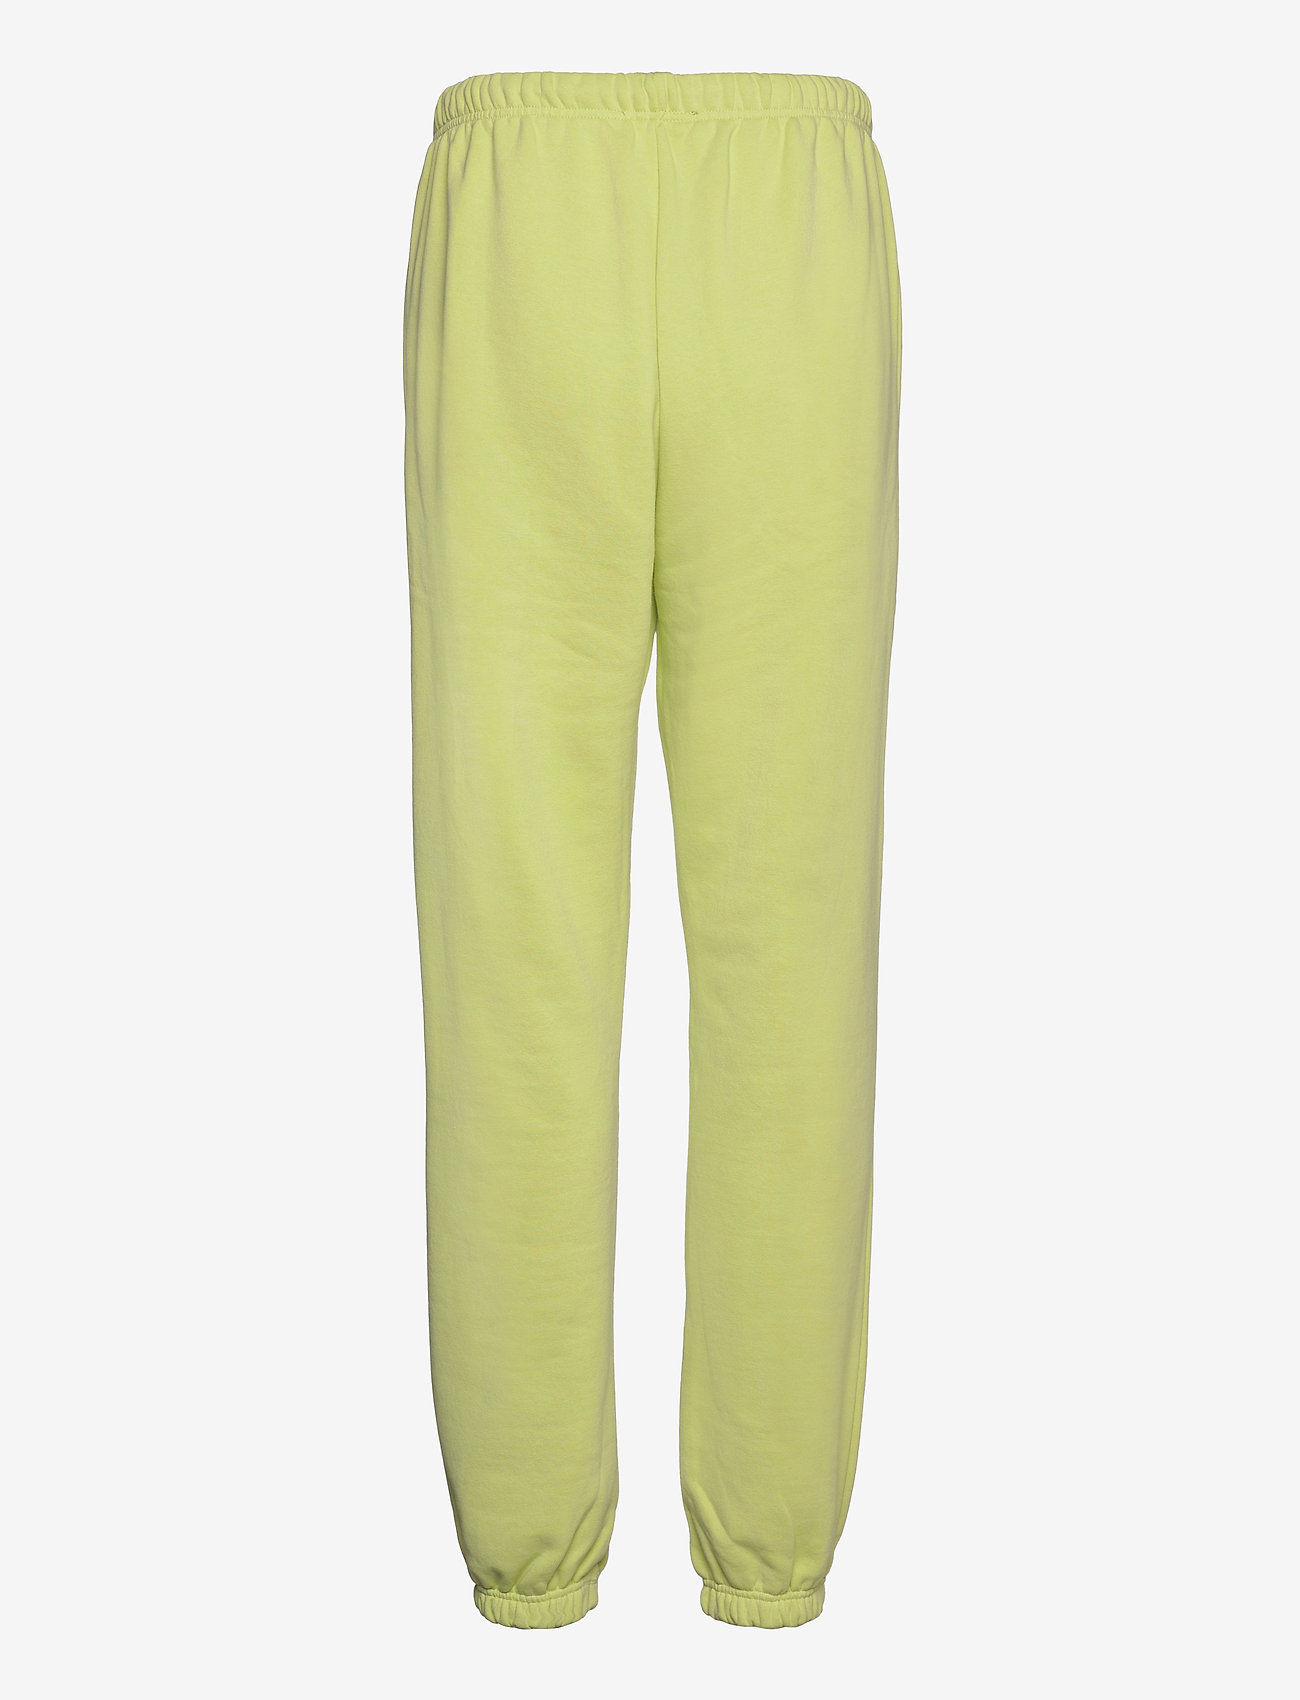 OW Collection - OW Sweatpants - damen - green - 1